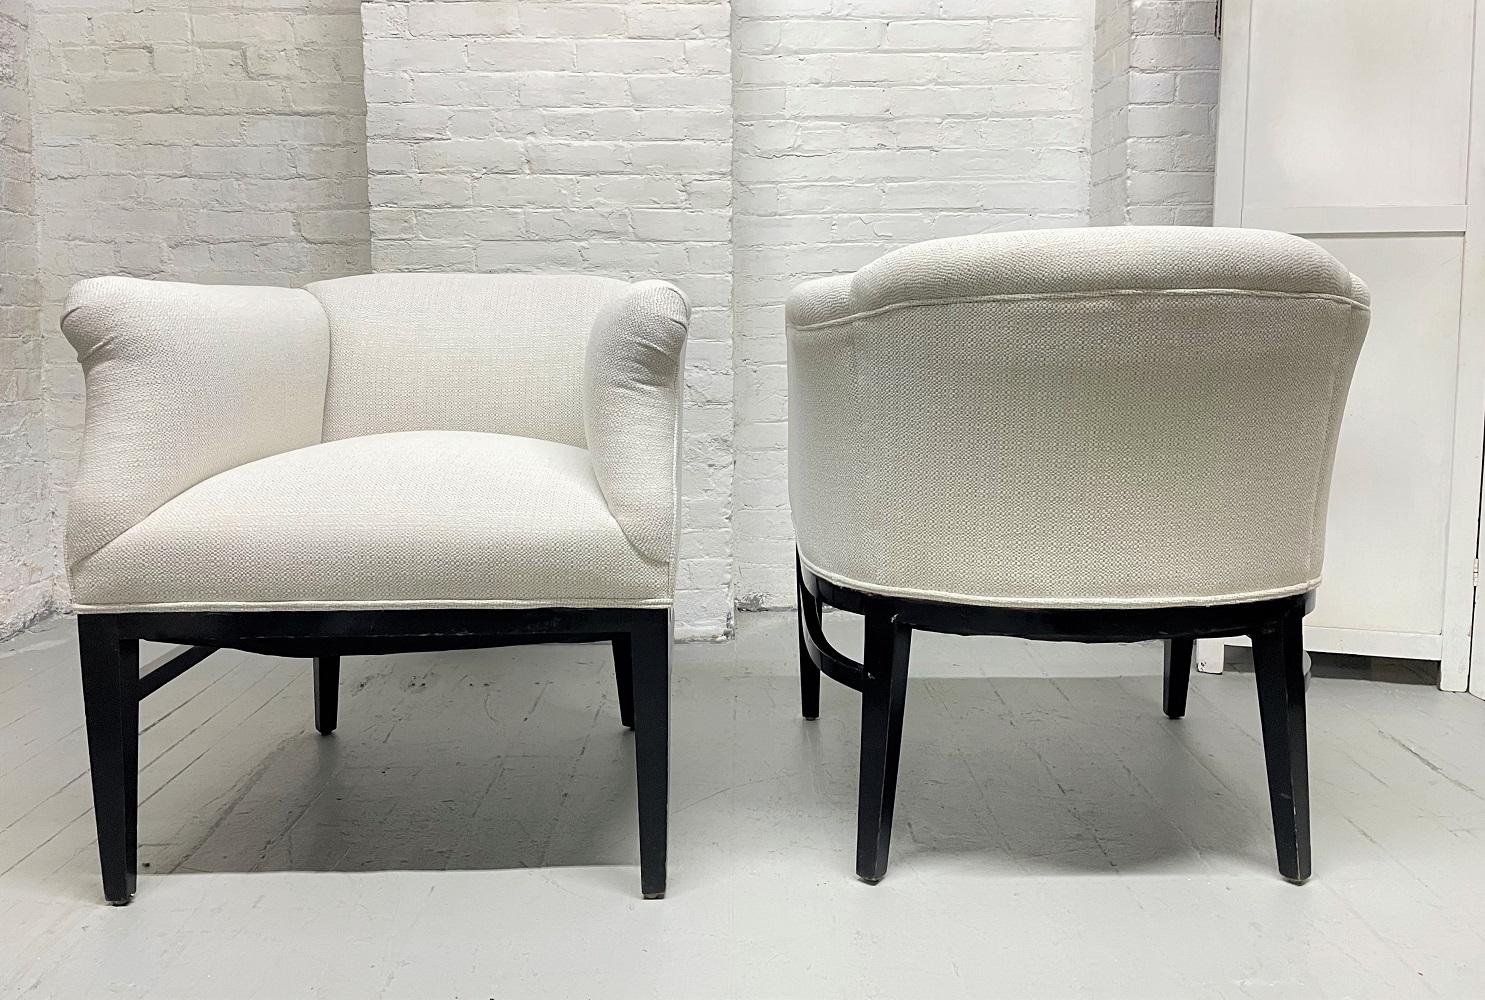 Pair of 1940s Art Deco Lounge Chairs In Good Condition For Sale In New York, NY